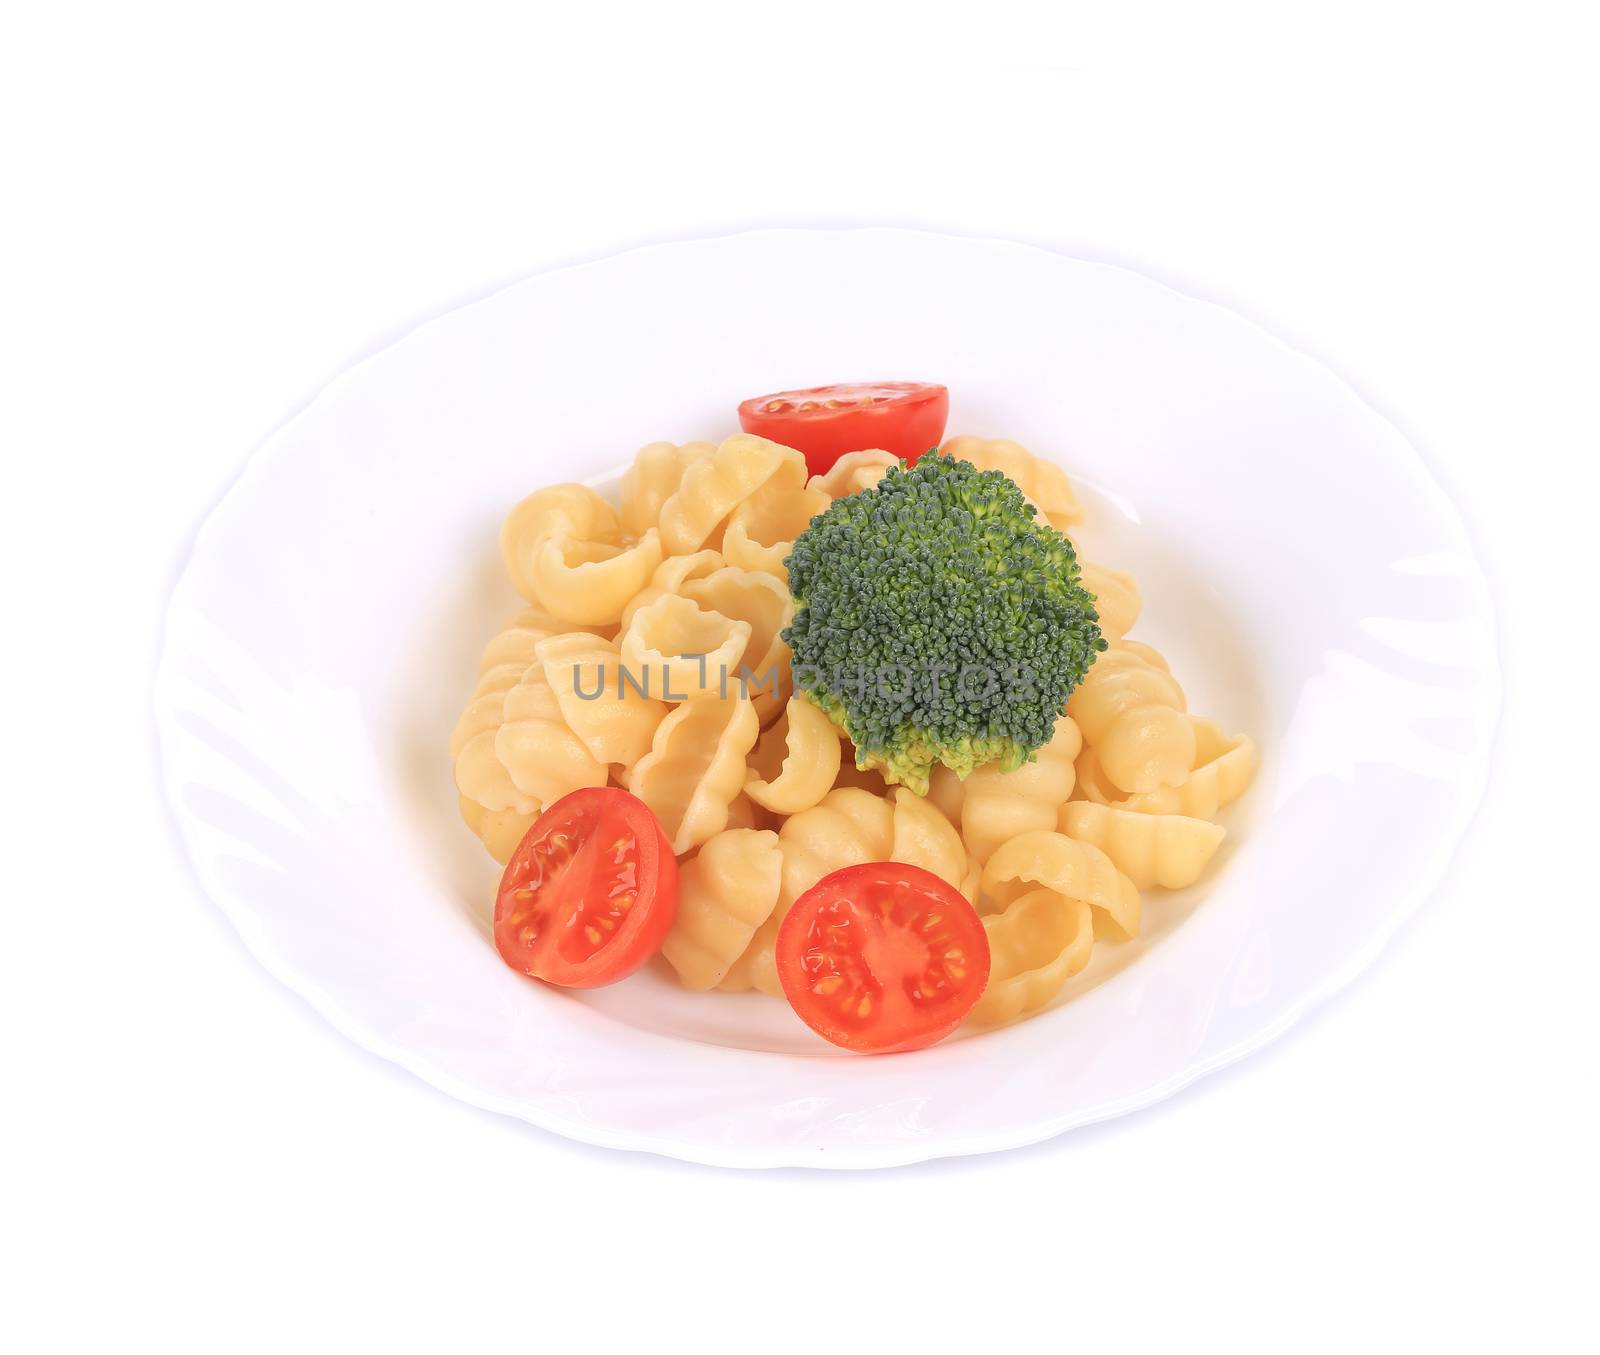 Tasty itlaian pasta gnocchi with broccoli. Isolated on a white background.